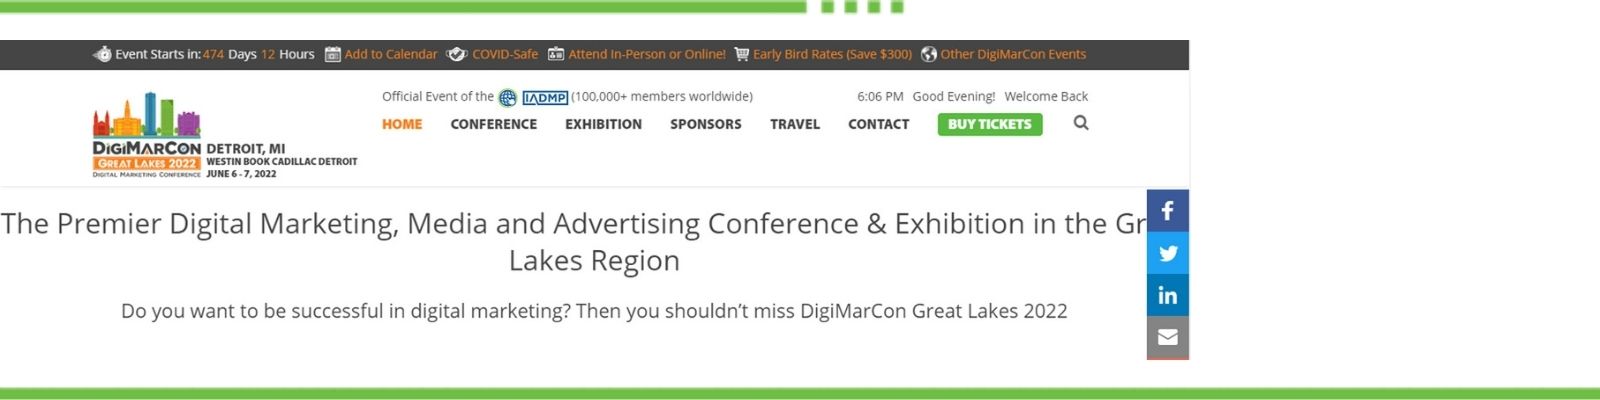 DigiMarCon Great Lakes